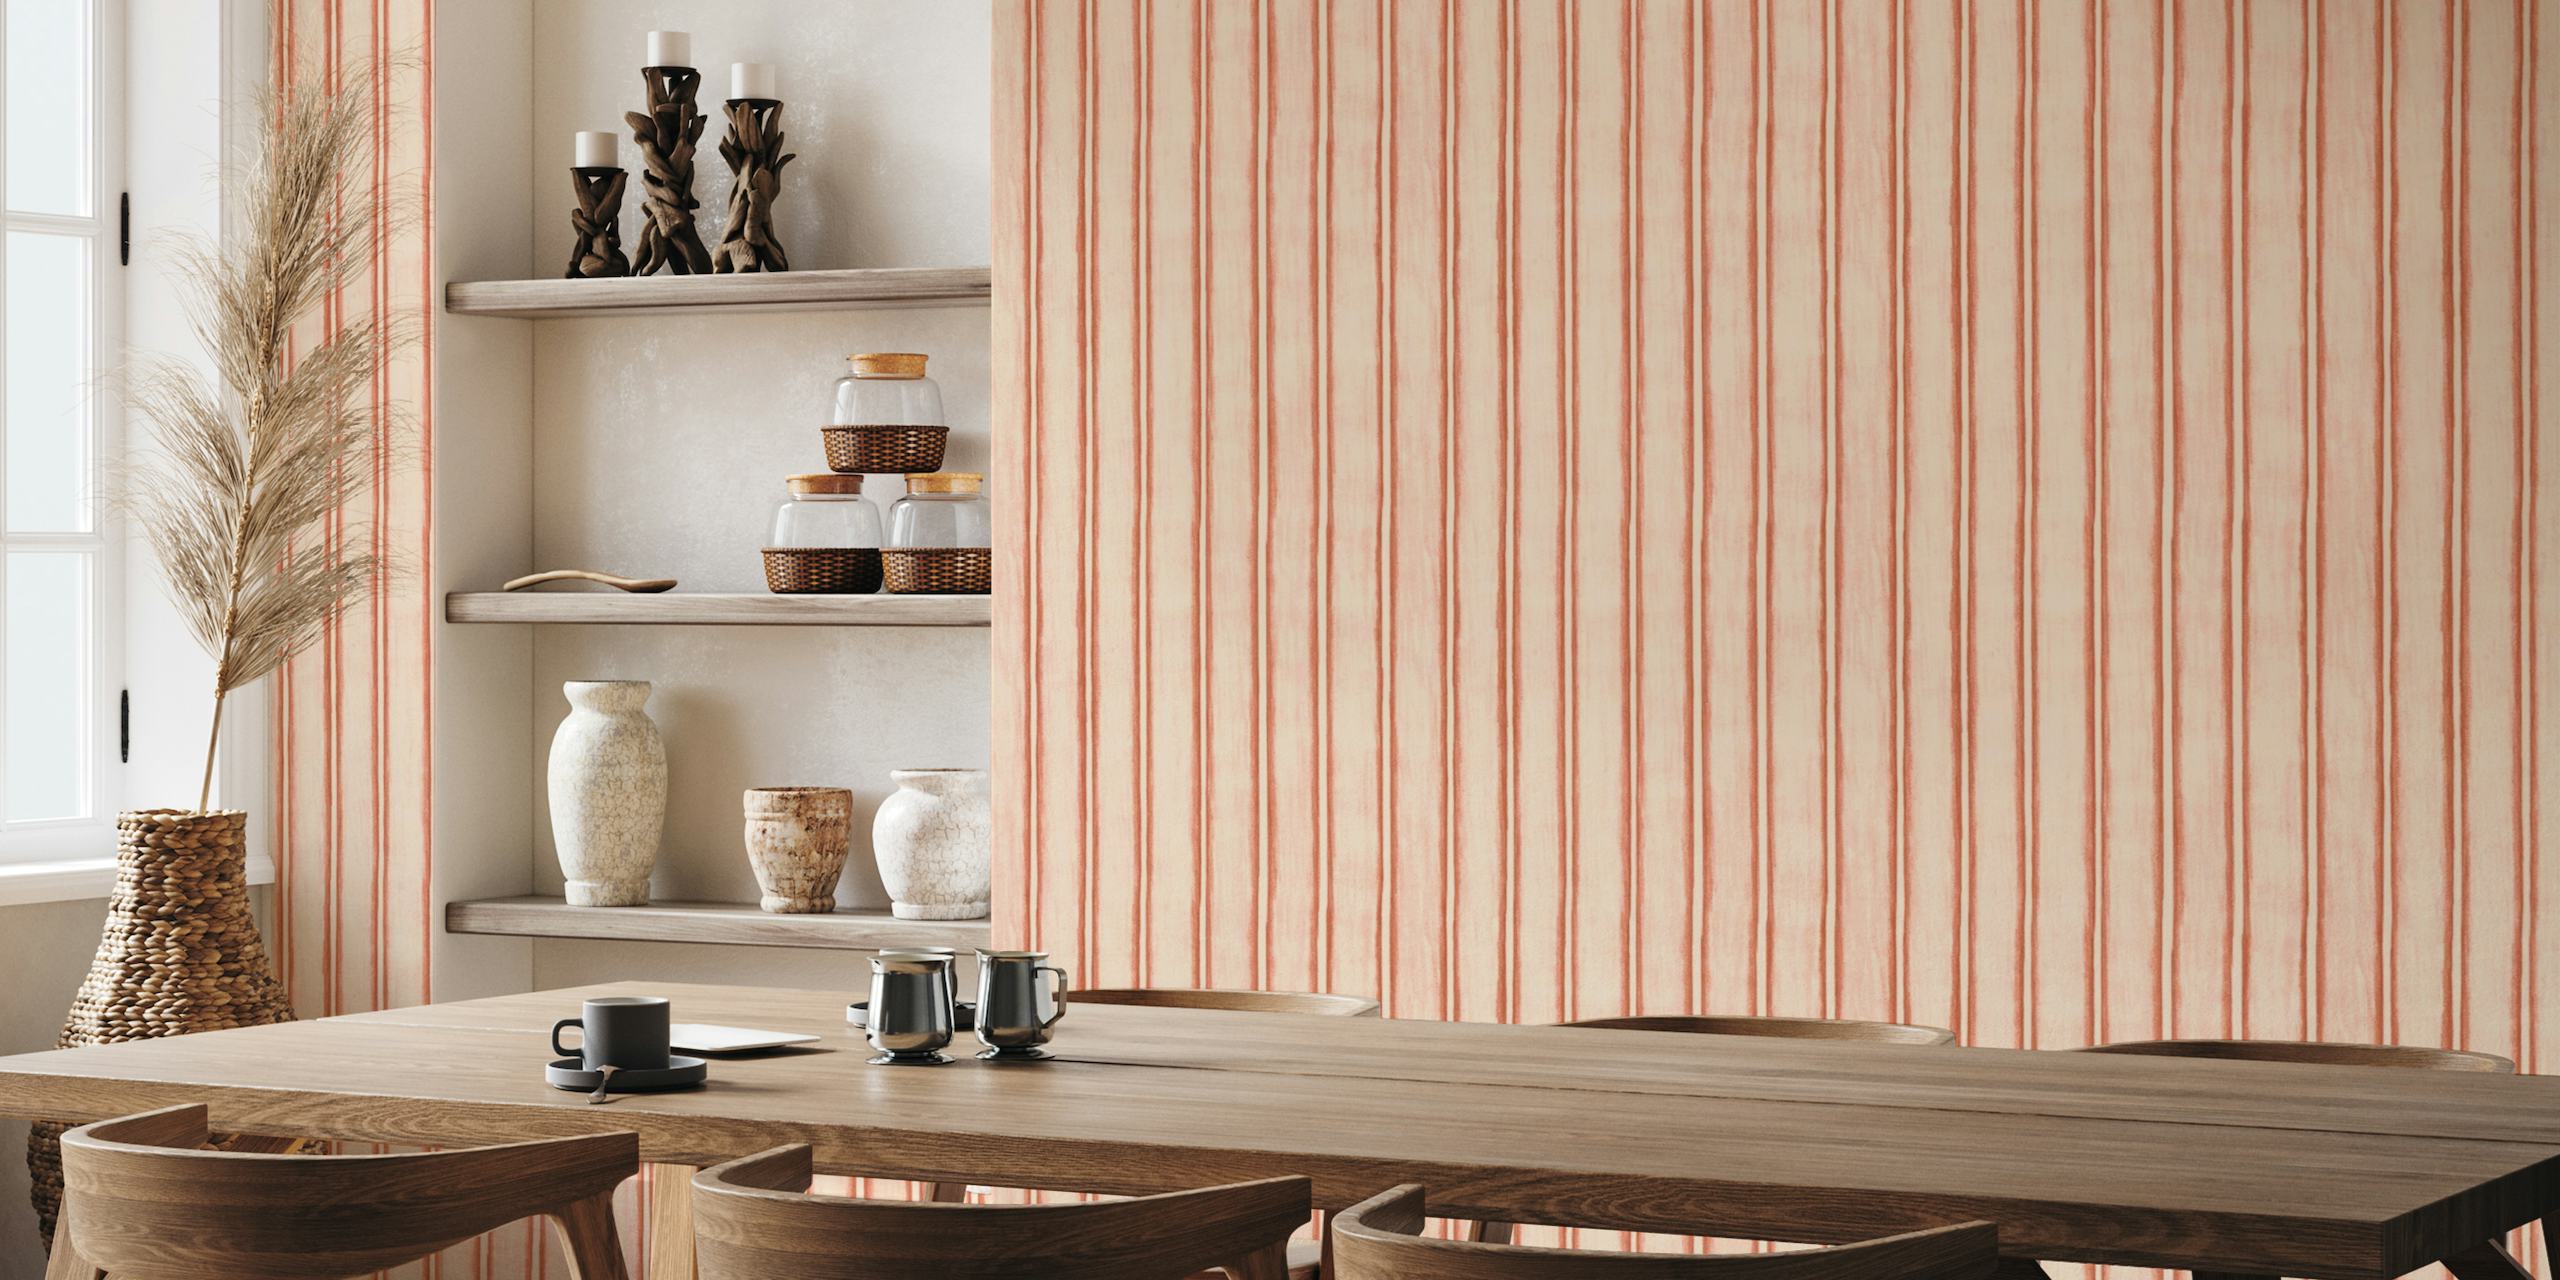 Fotomural Dusty Tangerine Chalky Stripes con motivos verticales